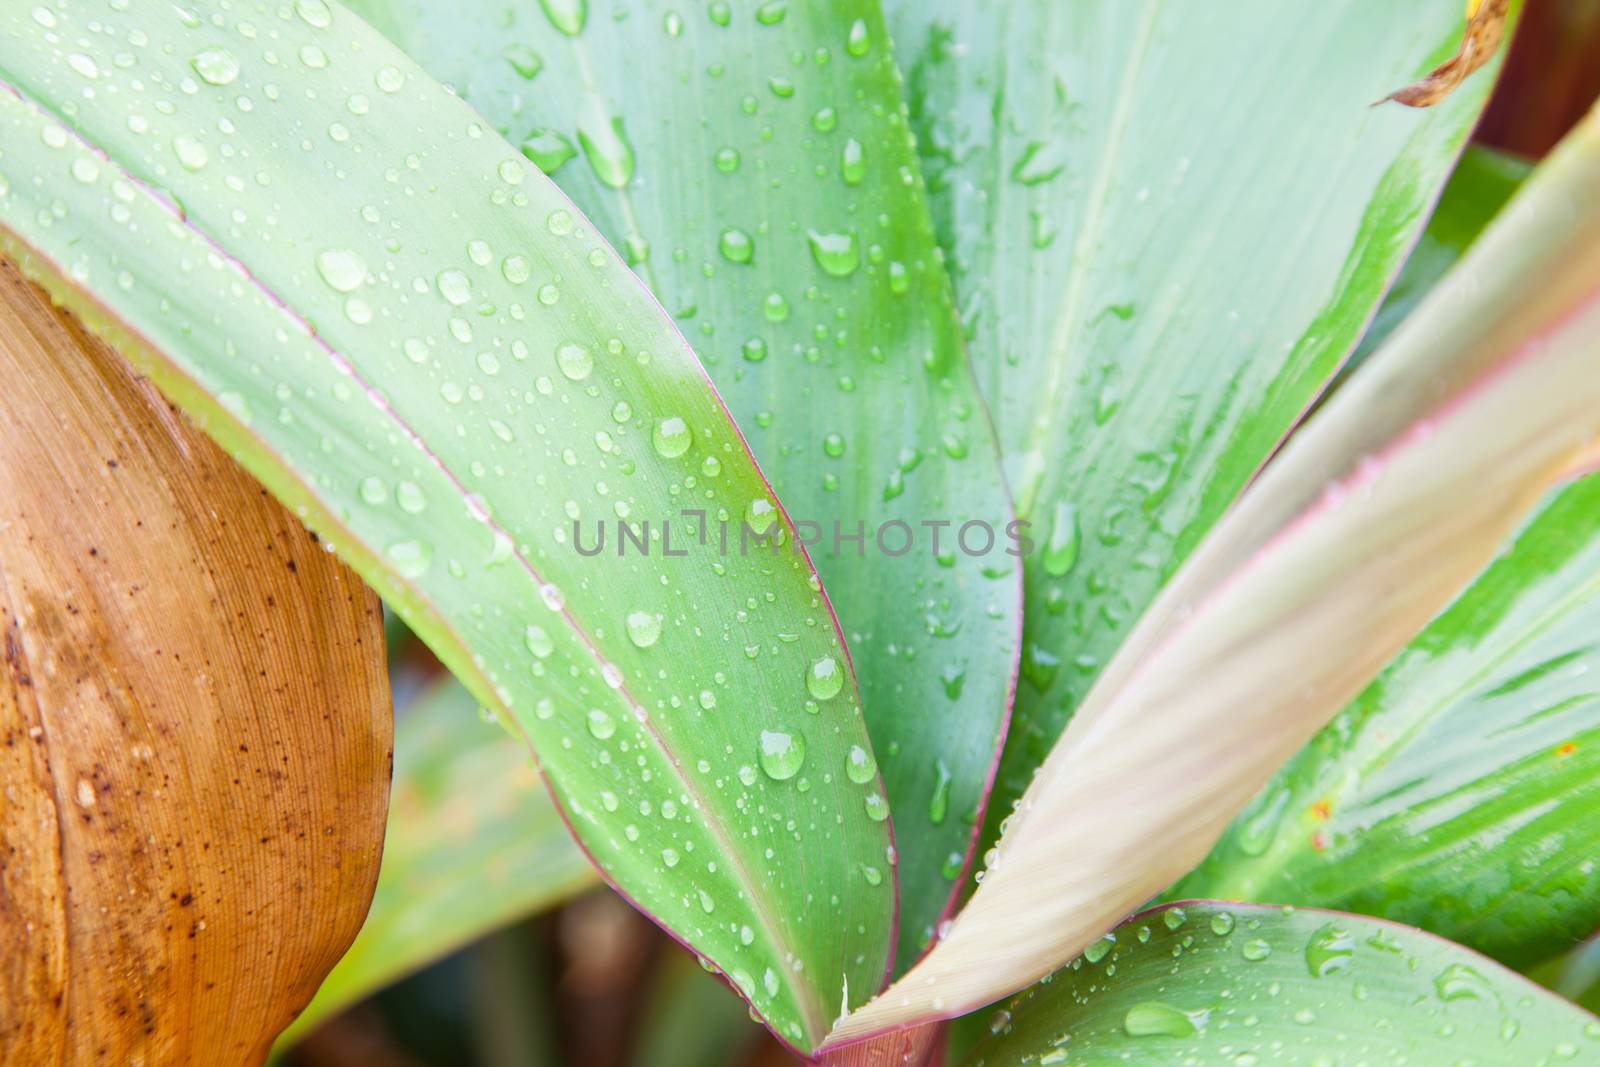 Water droplets on leaves by a454